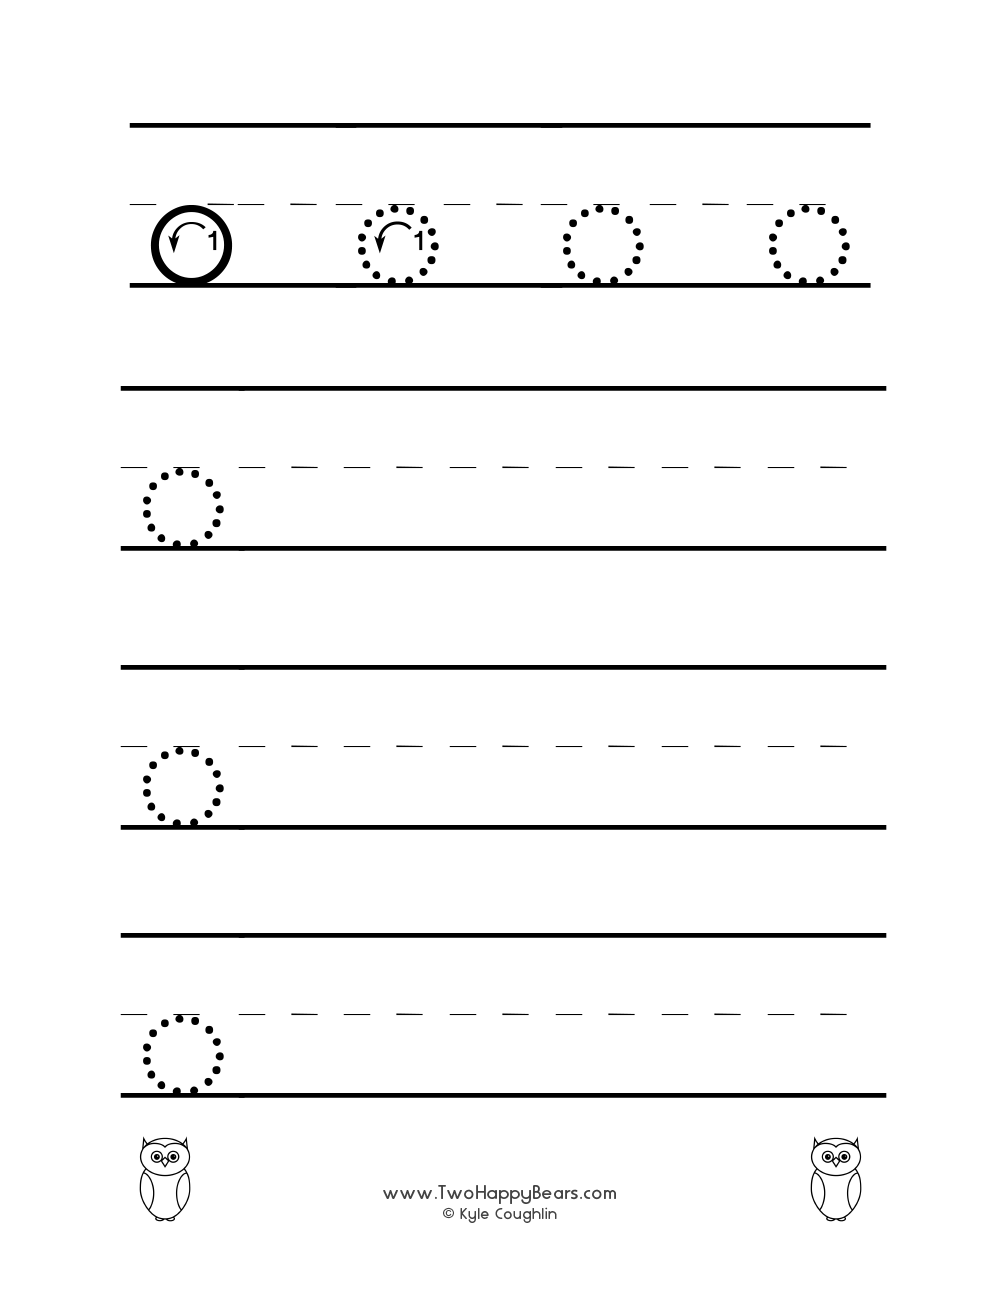 Lowercase letter O worksheet for tracing and drawing